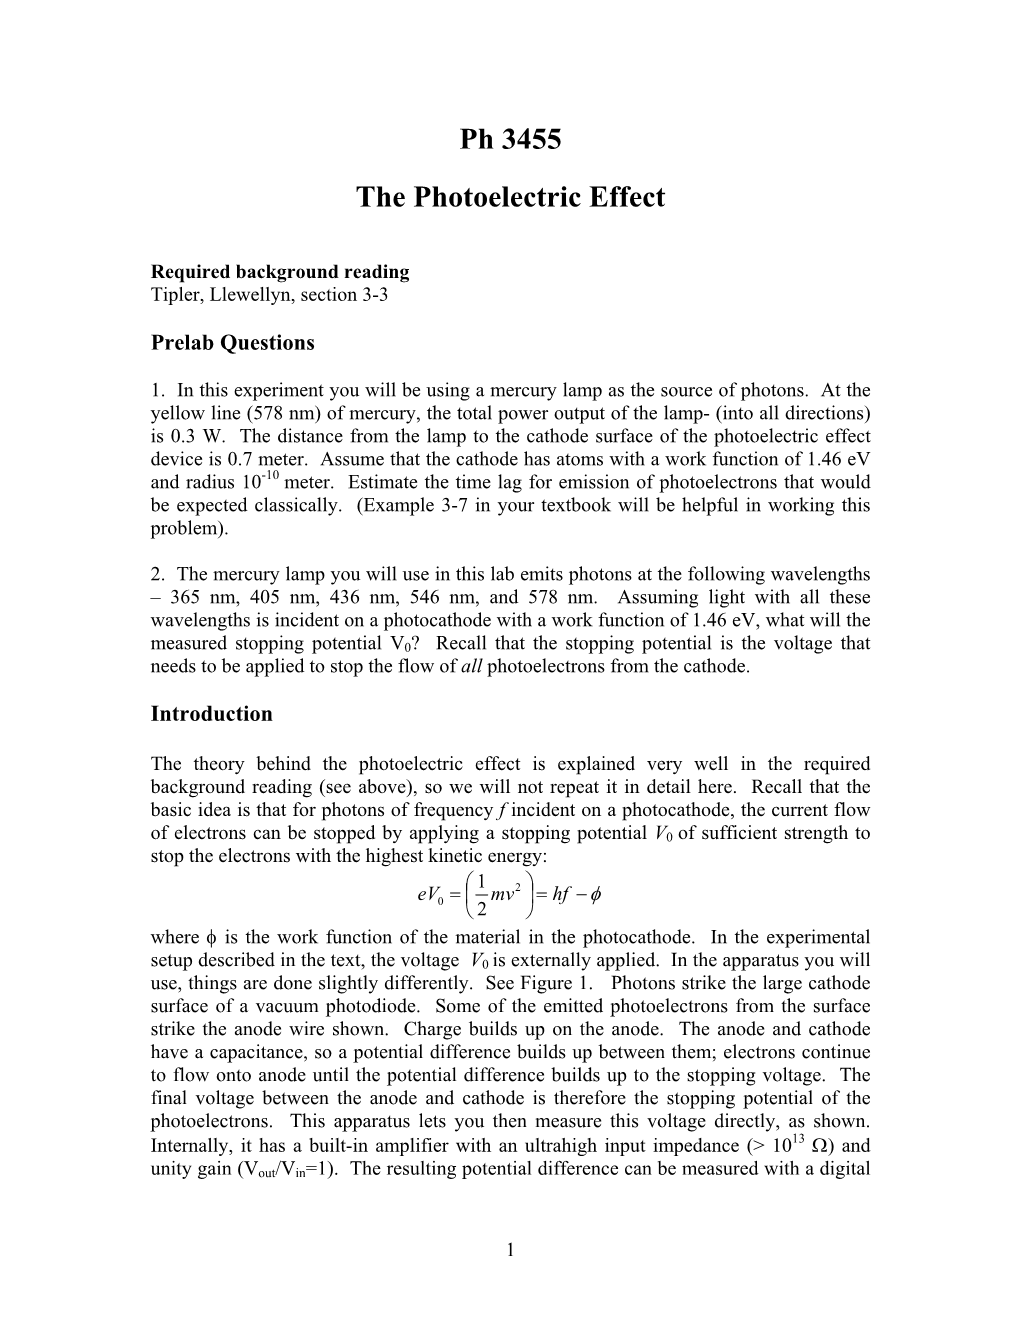 Ph 3455 the Photoelectric Effect